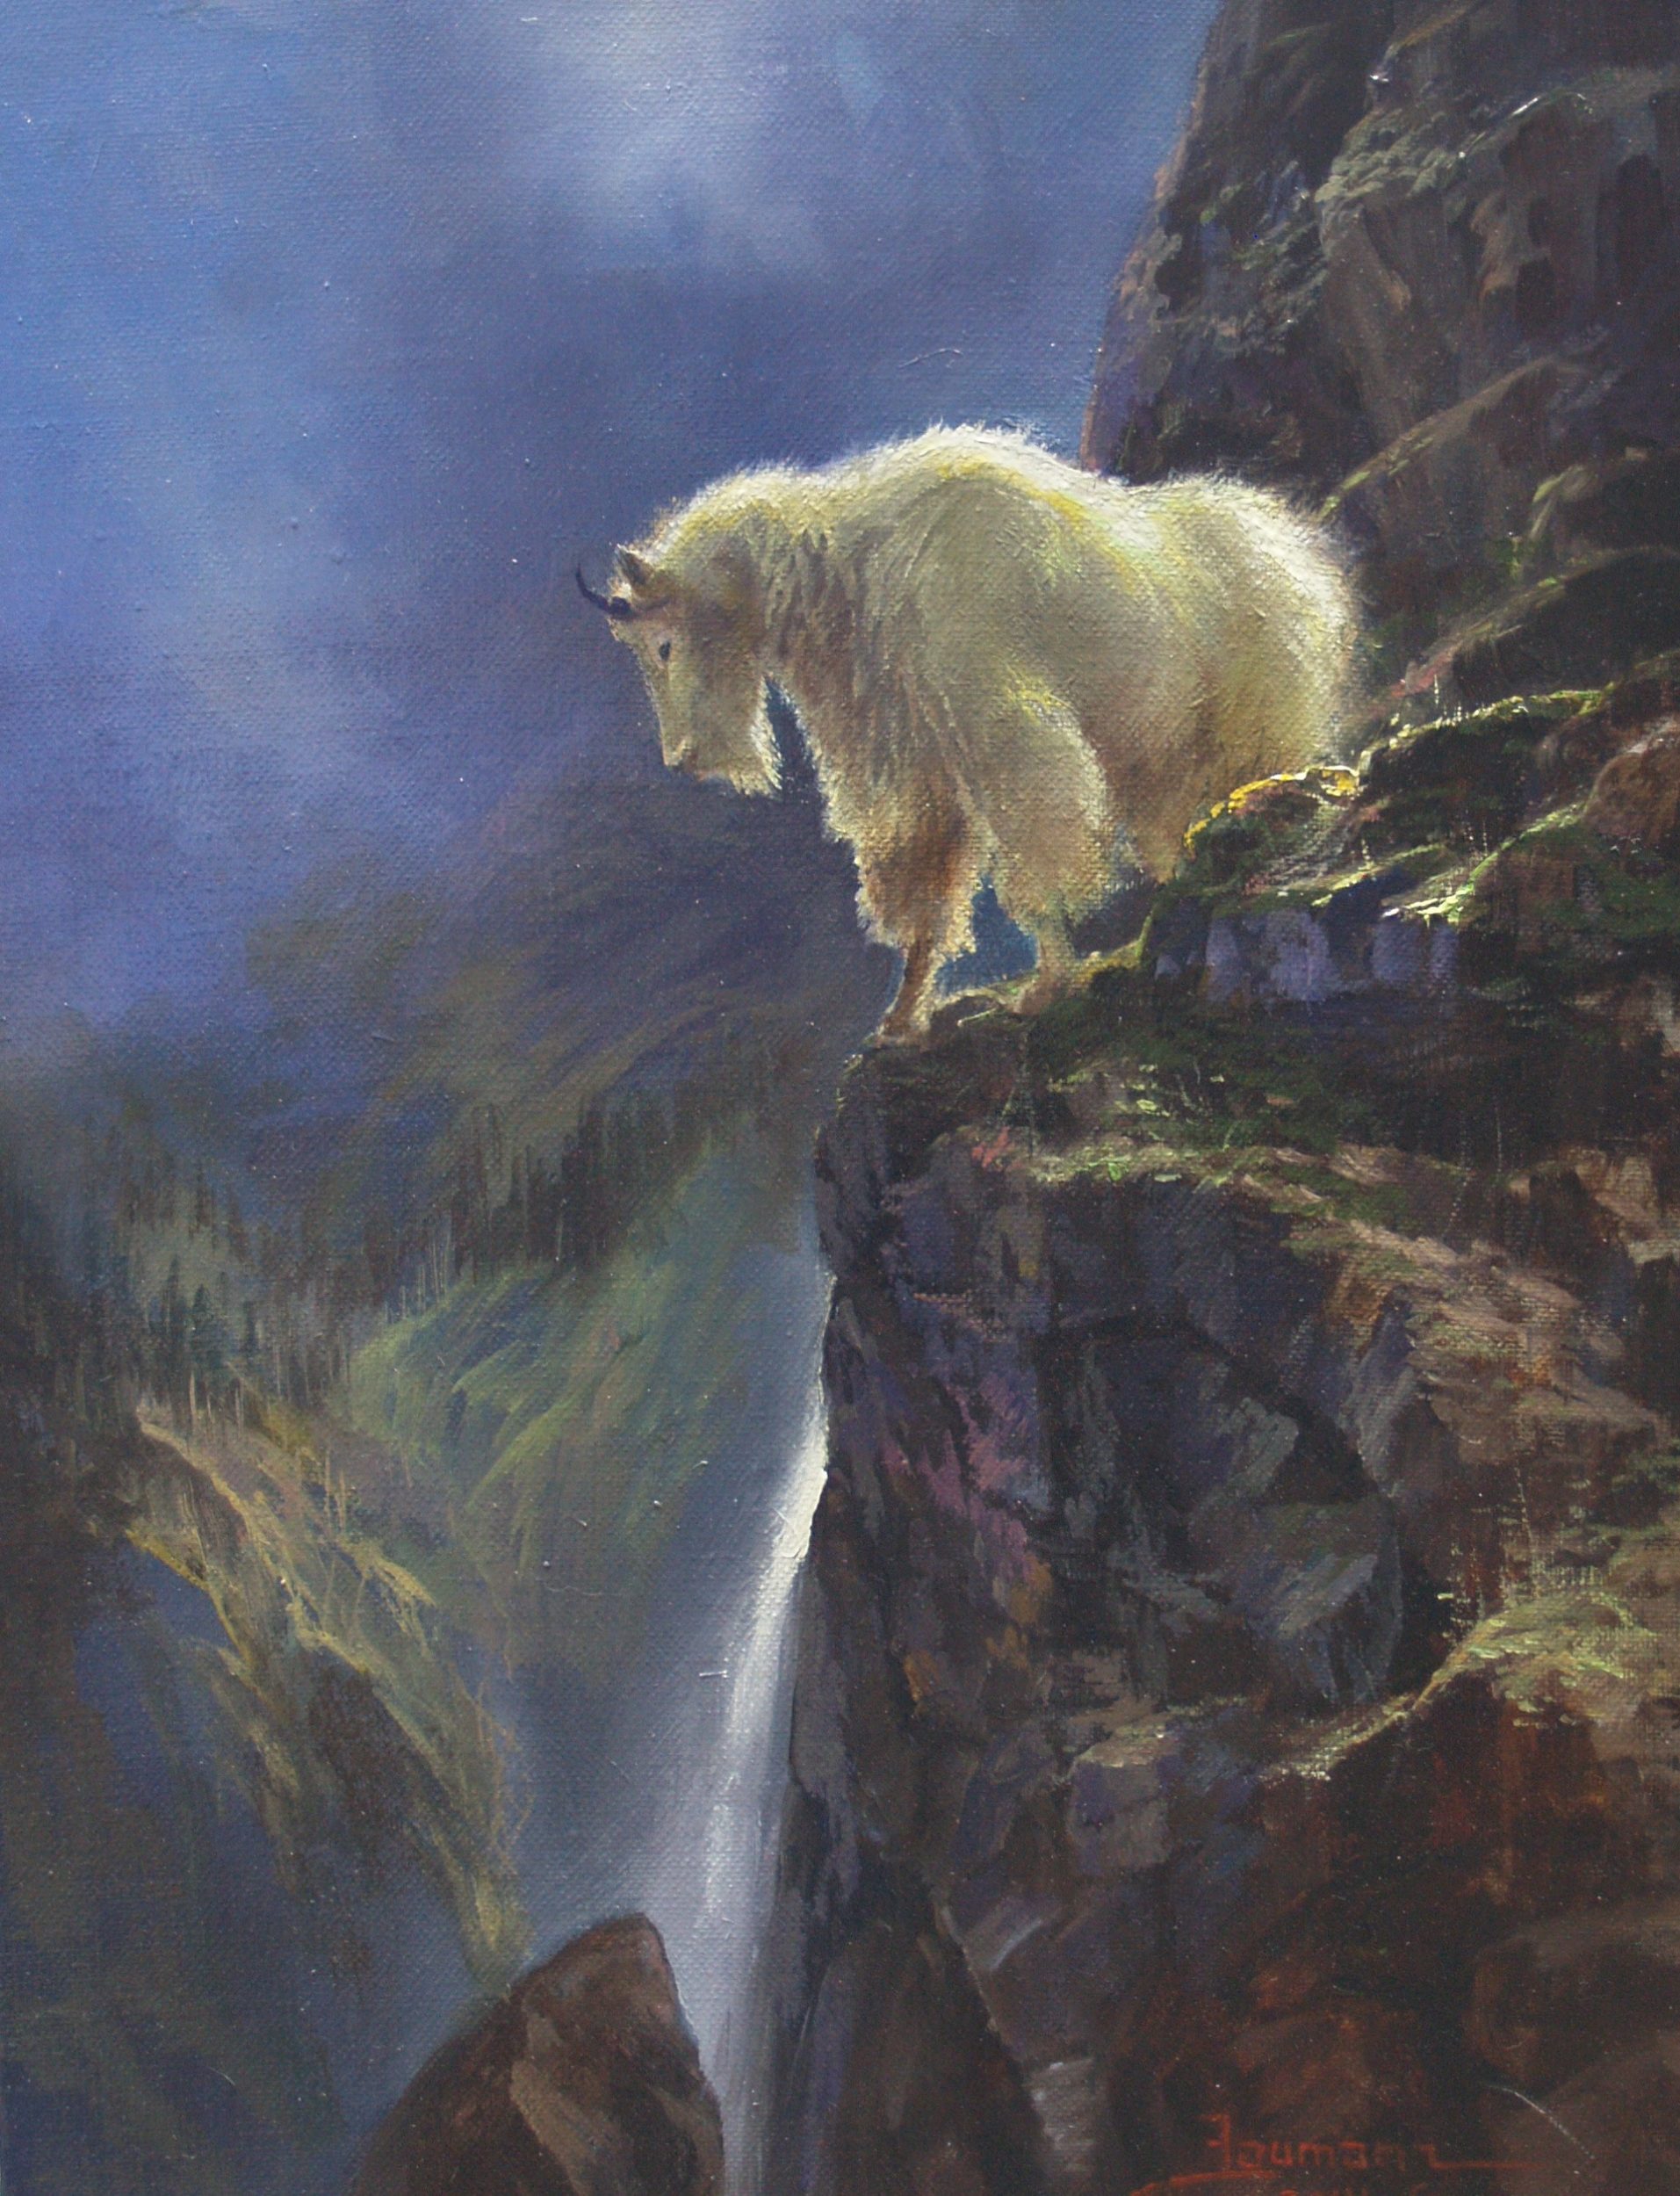 This painting by Stefan Baumann called Moonlit Watch features a mountain Dall Sheep on a ledge in the moonlight in Glacier National Park.